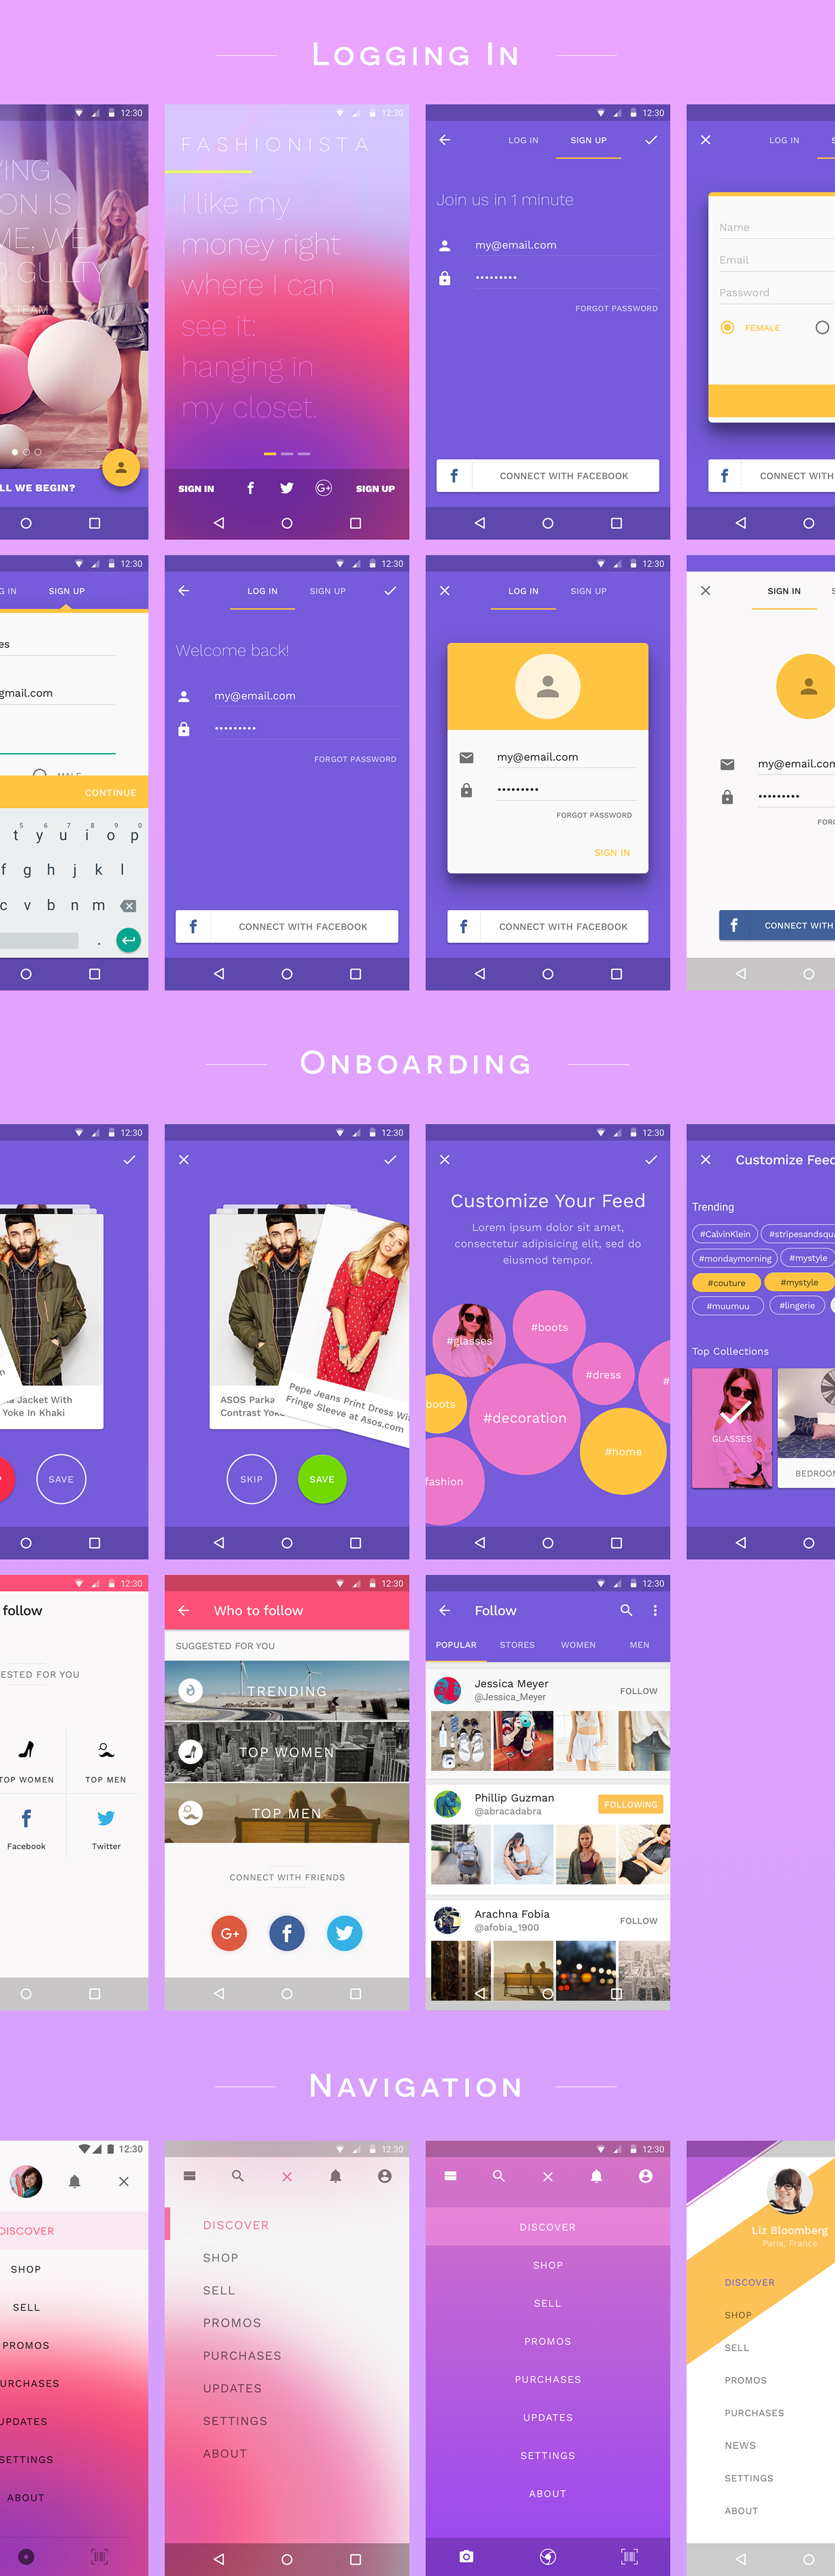 material design ui kit mobile design android UX design Fashion  pink Interaction design  sketch Animated Prototype